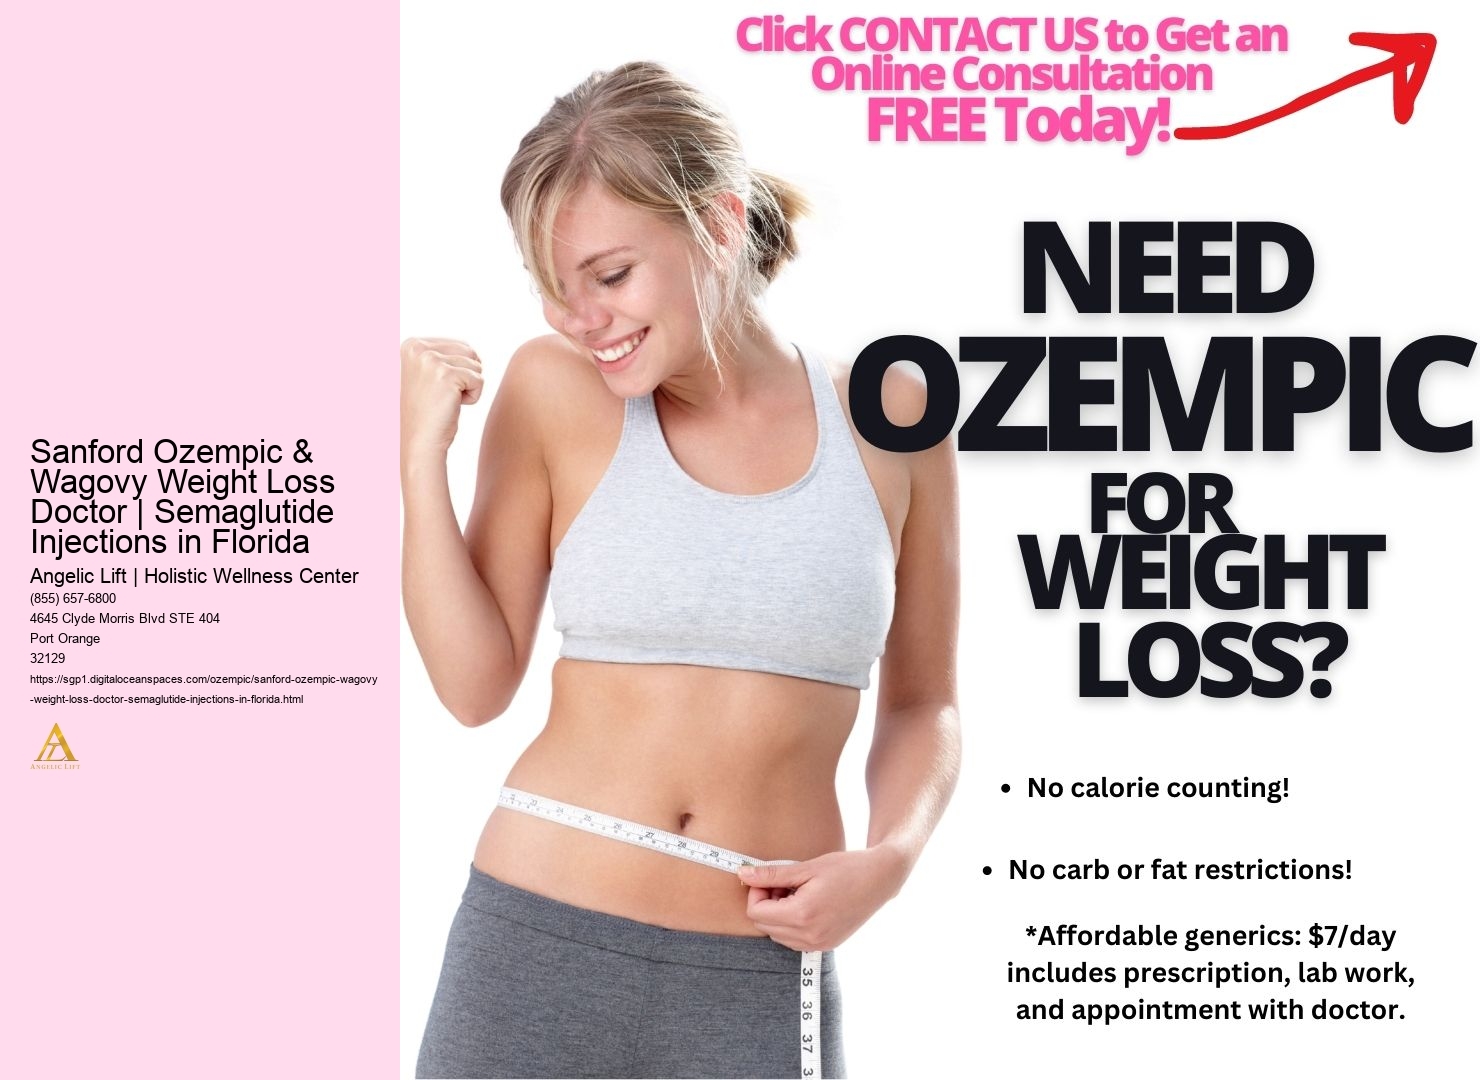 Sanford Ozempic & Wagovy Weight Loss Doctor | Semaglutide Injections in Florida